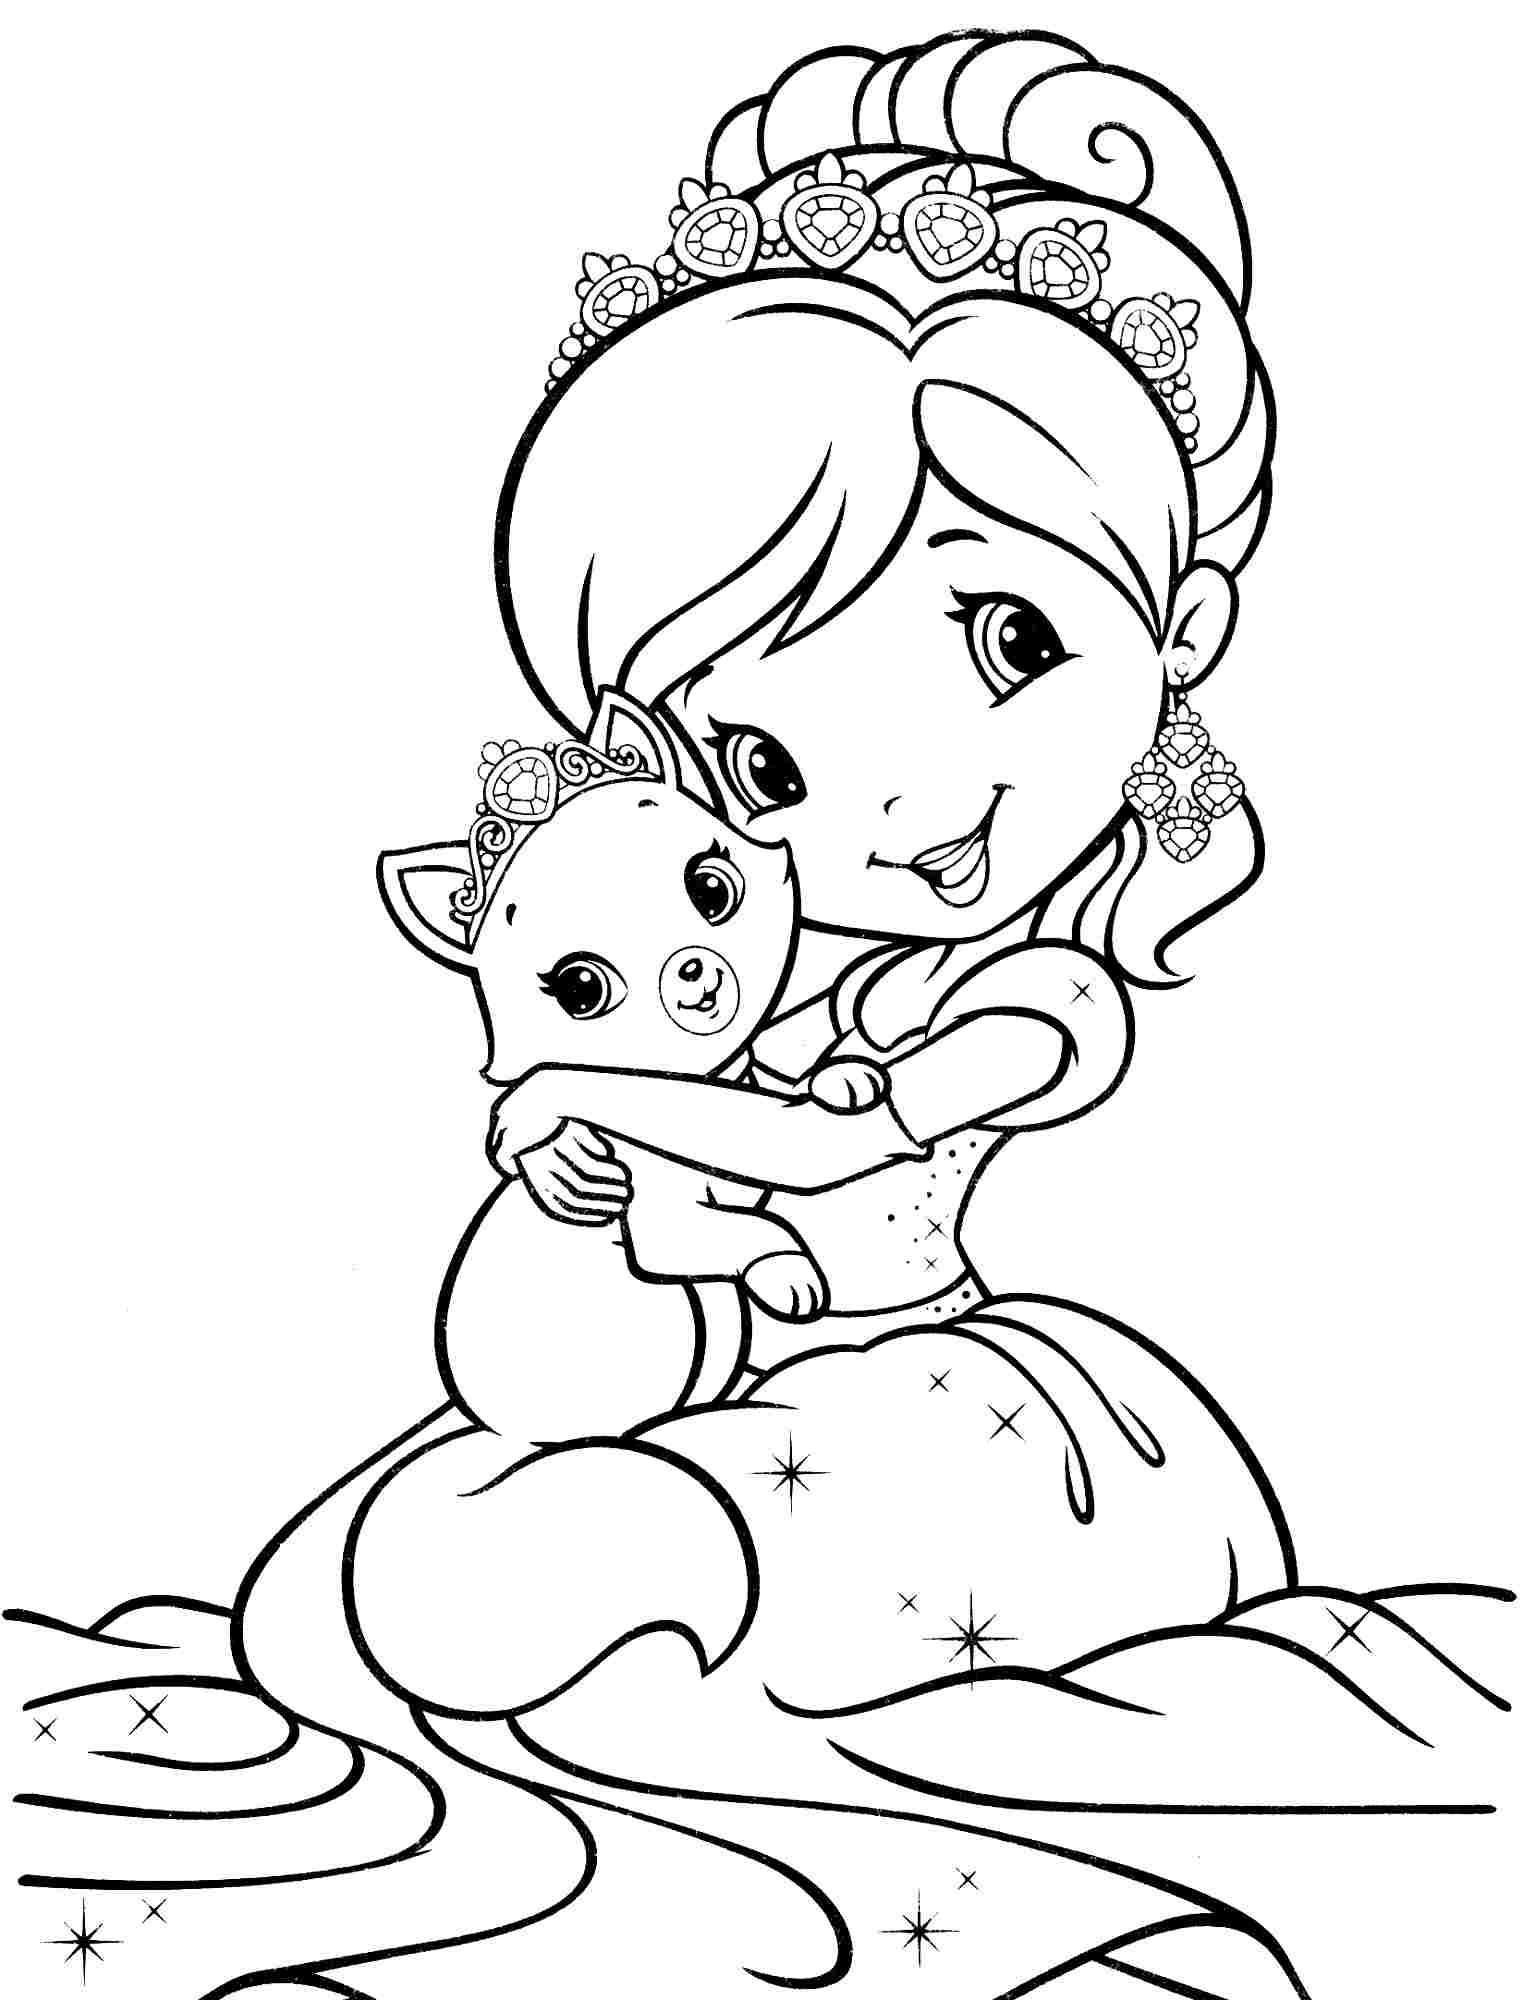 8 Pics of Strawberry Shortcake Cartoon Coloring Pages - Strawberry ...